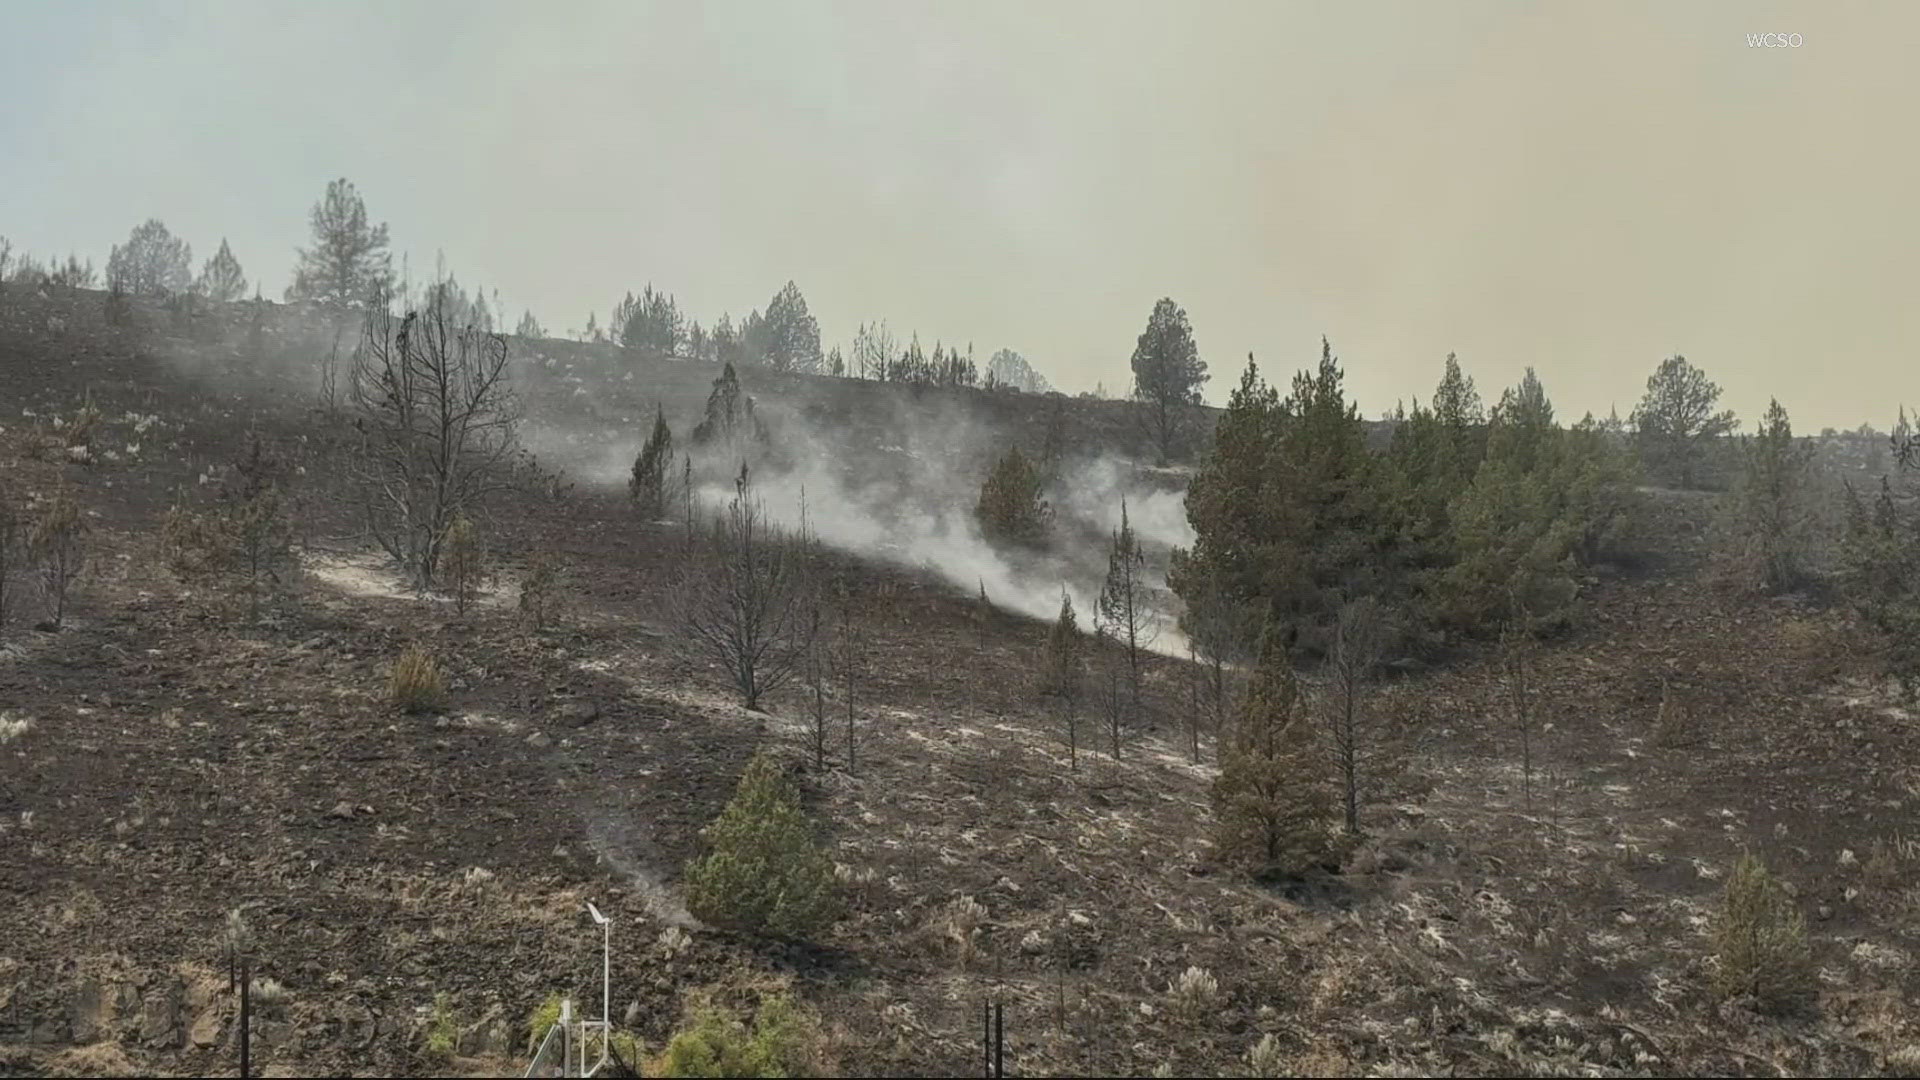 The Darlene 3 Fire is burning in Deschutes County, prompting evacuations for the La Pine area, while the Long Bend Fire in Wasco County is 60% contained.